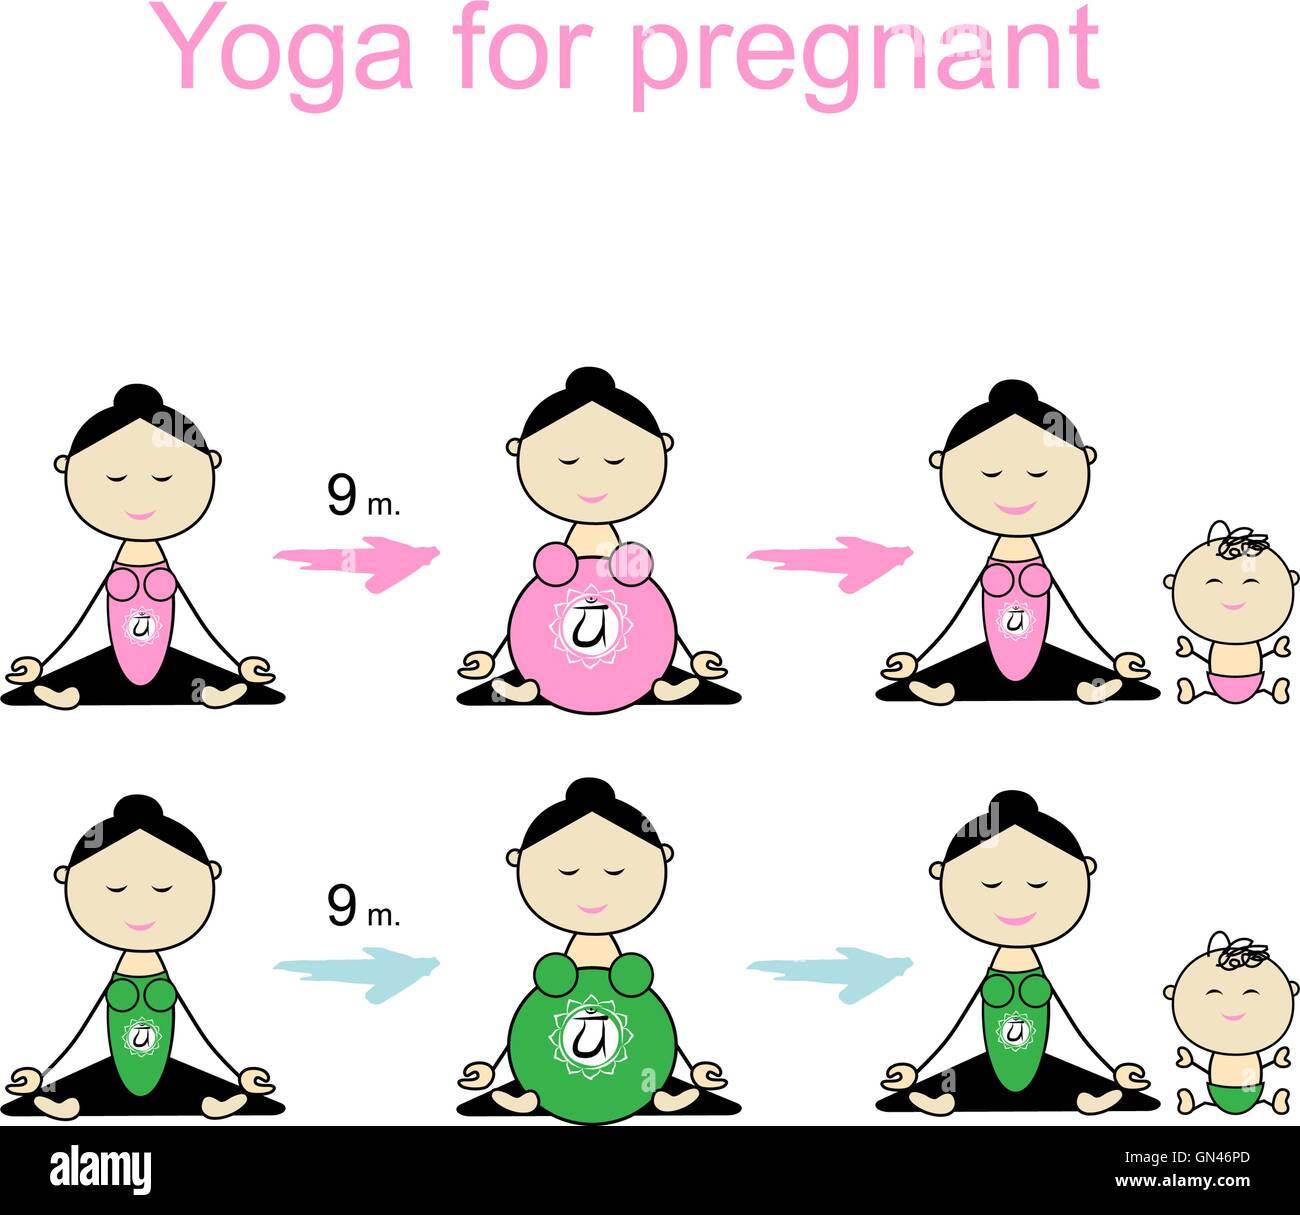 Maternity yoga Stock Vector Images - Alamy